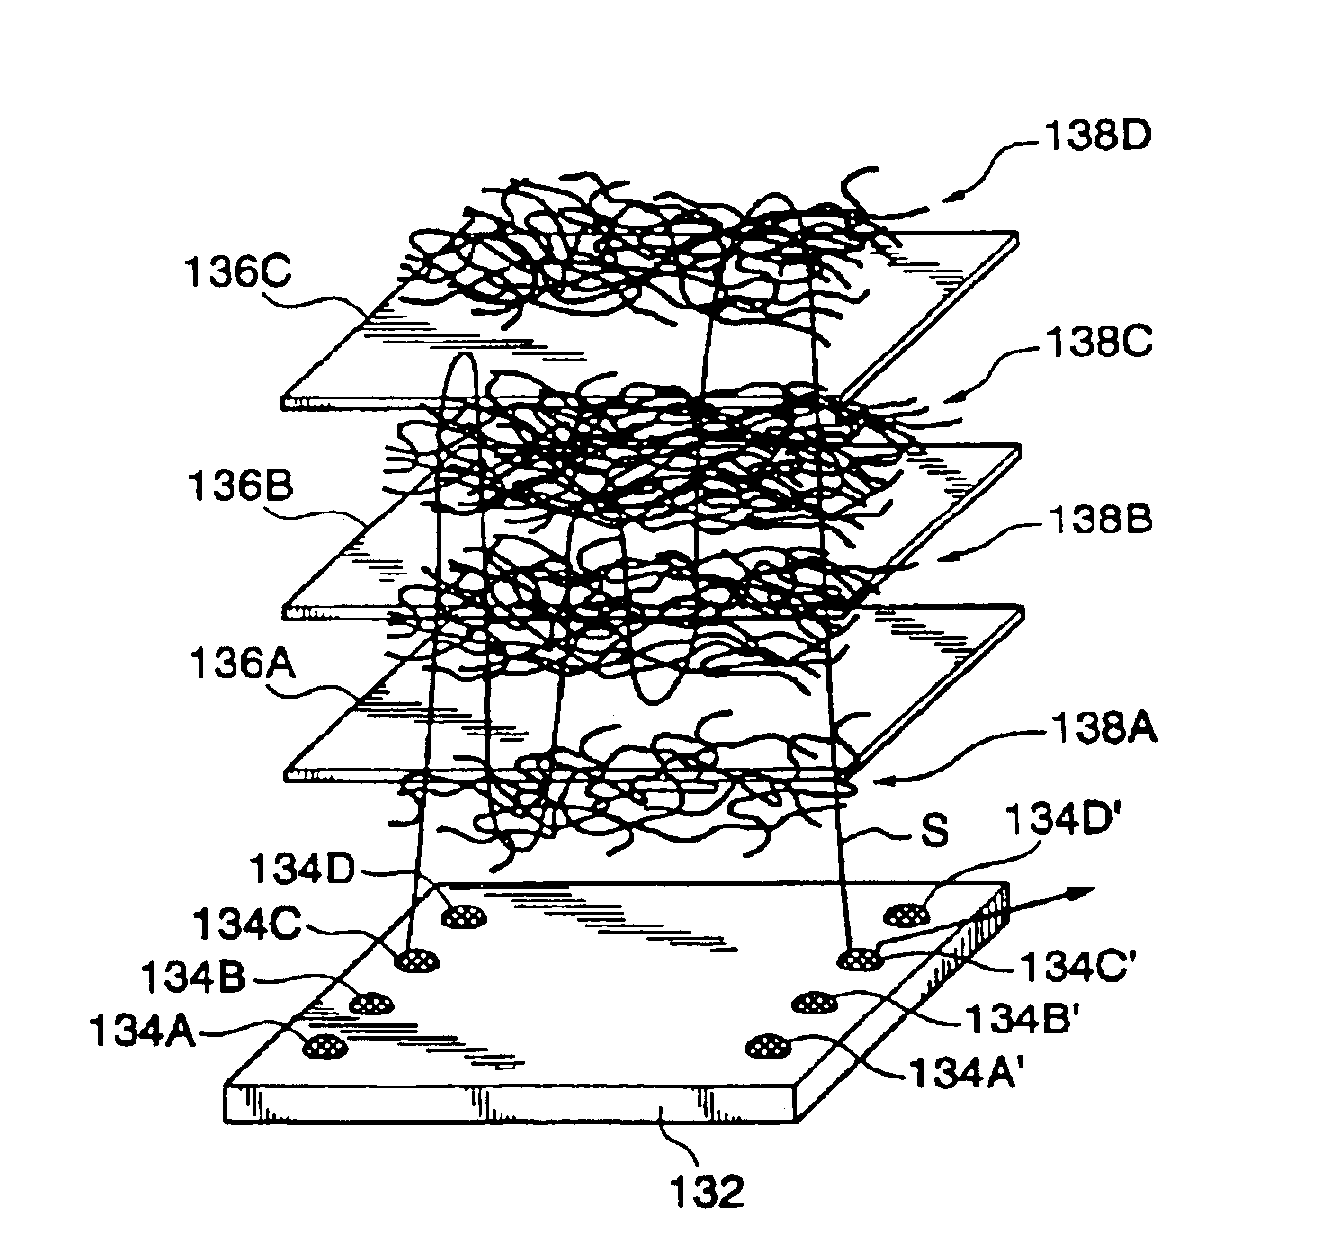 Carbon nanotube structures, carbon nanotube devices using the same and method for manufacturing carbon nanotube structures